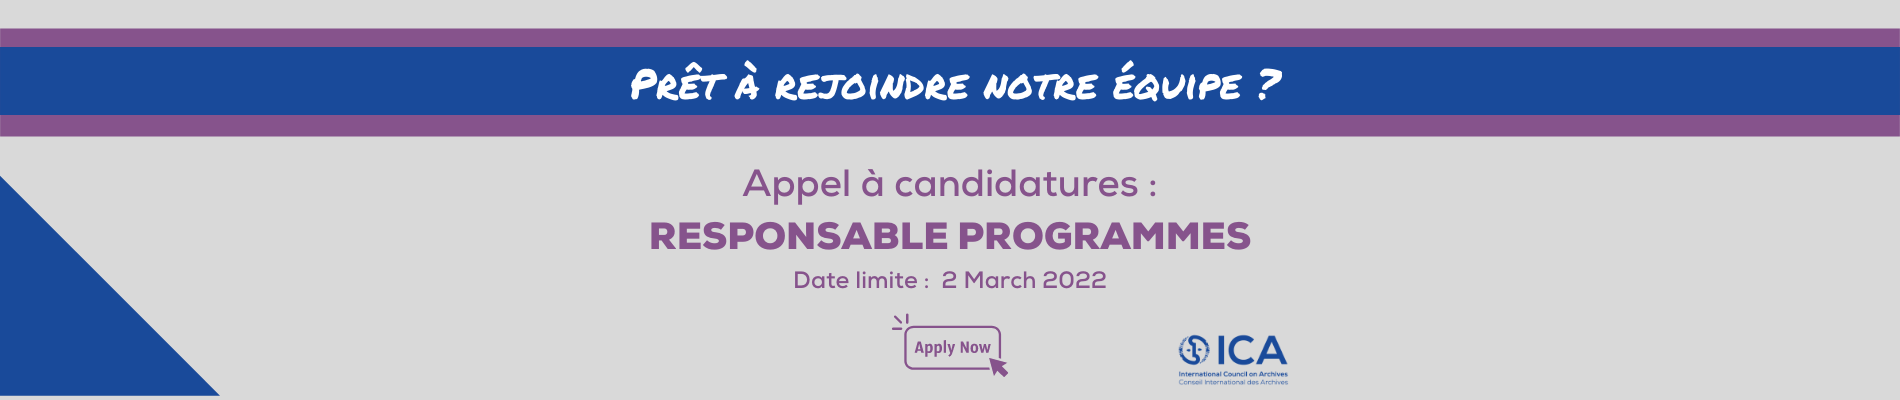 bannercall_for_applications_-_programme_officer_1900_x_400_px_fr